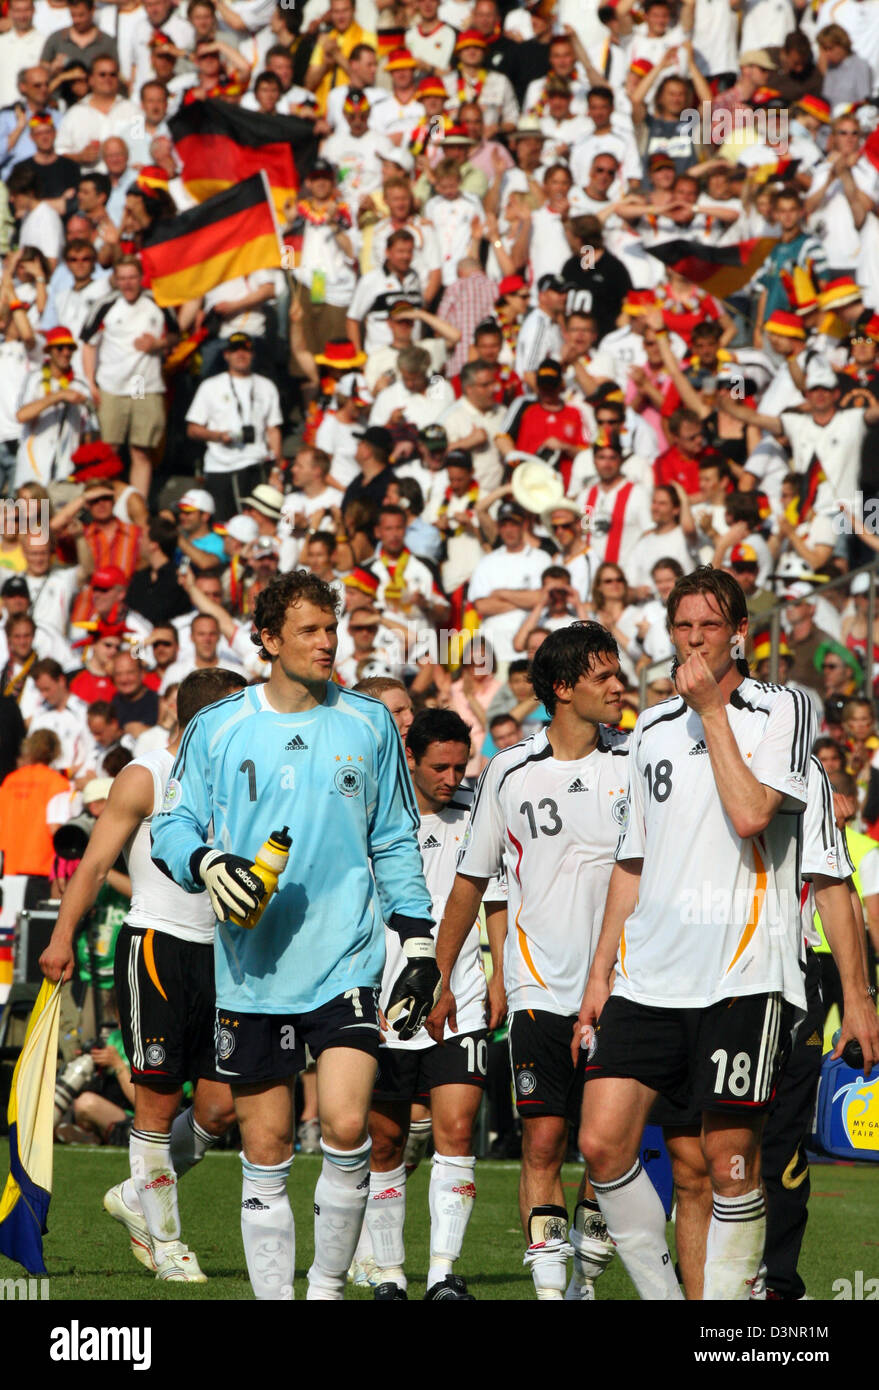 German team members (L-R) goalkeeper Jens Lehmann, Michael Ballack and Tim Borowski, celebrate the 3-0 against Ecuador after the group A preliminary match of the 2006 FIFA World Cup between Ecuador and Germany at the Olympic Stadium in Berlin, Germany, Tuesday, 20 June 2006. Photo: MICHAEL HANSCHKE +++ Mobile Services OUT +++ Please refer to FIFA's Terms and Conditions. Stock Photo